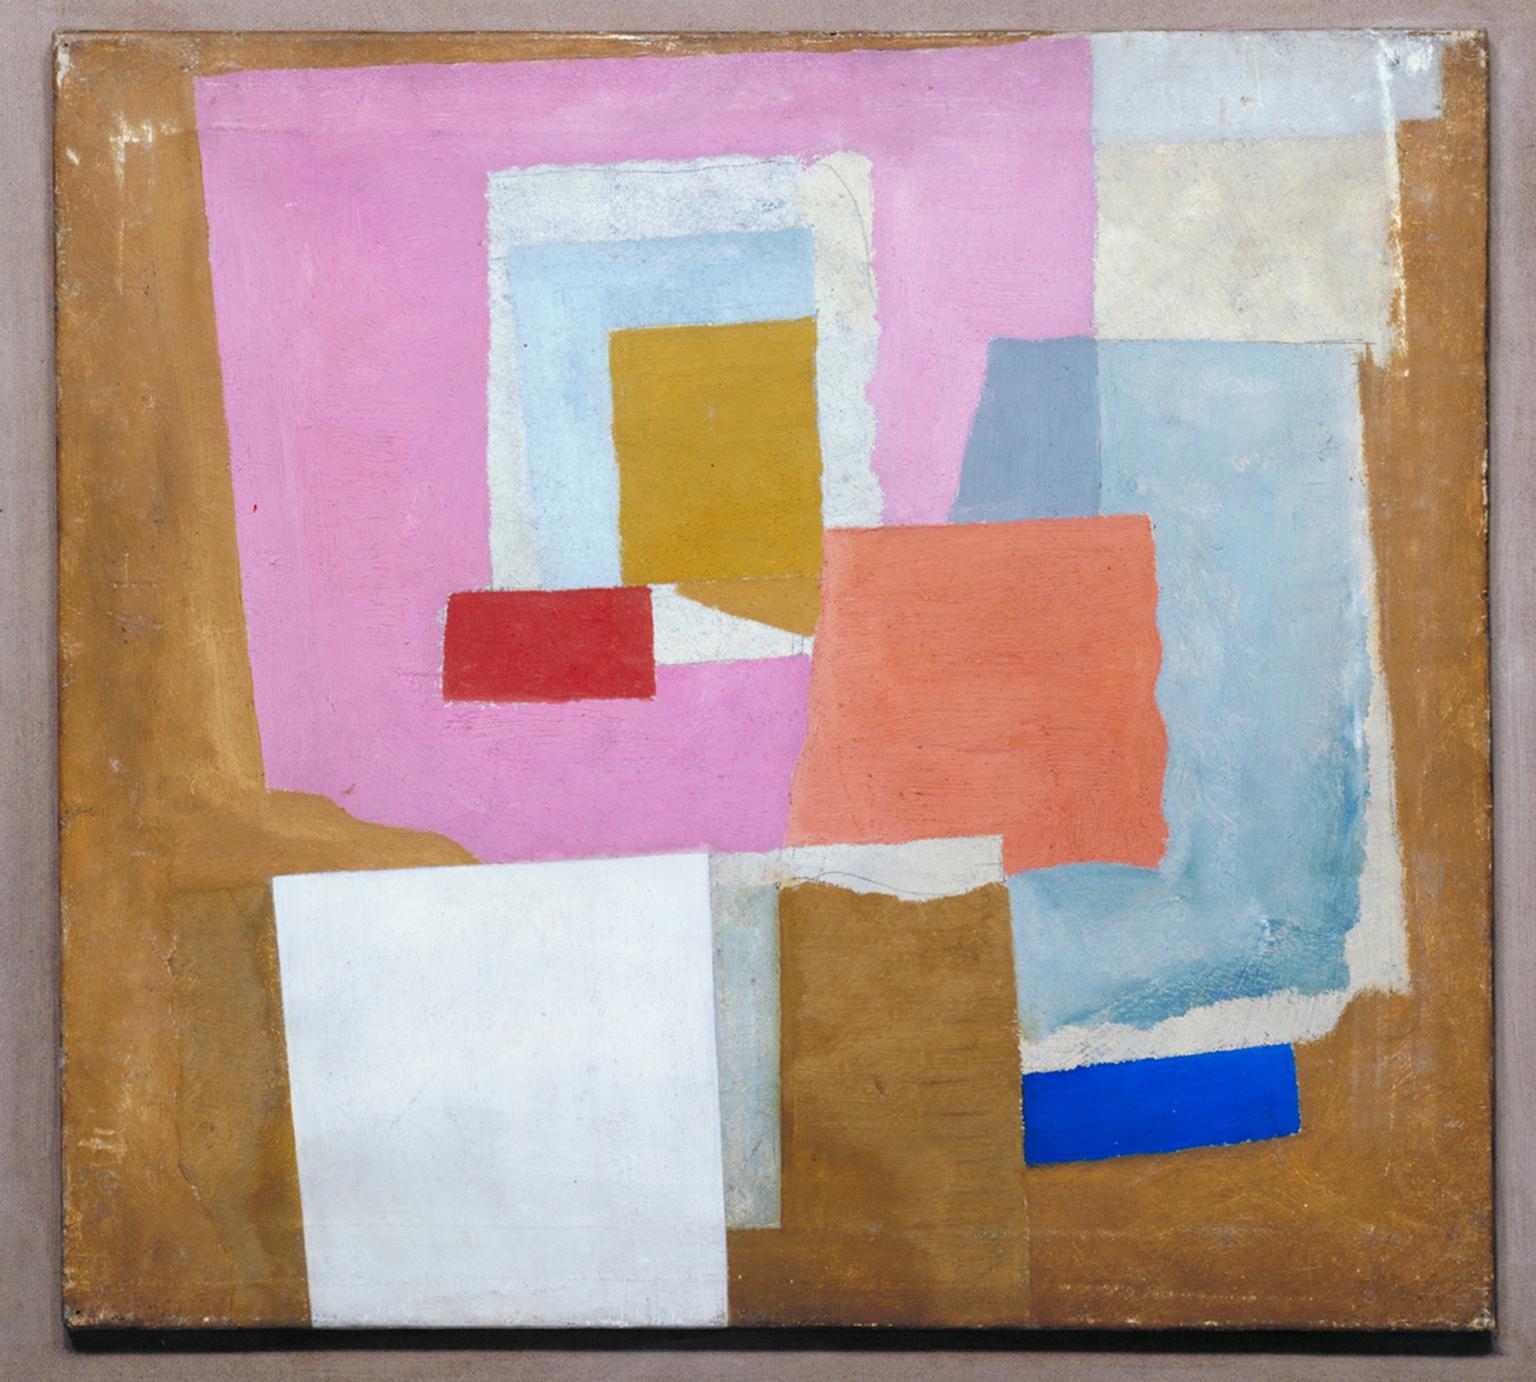 1924 (first abstract painting, Chelsea)', Ben Nicholson OM, c.1923-4 ...